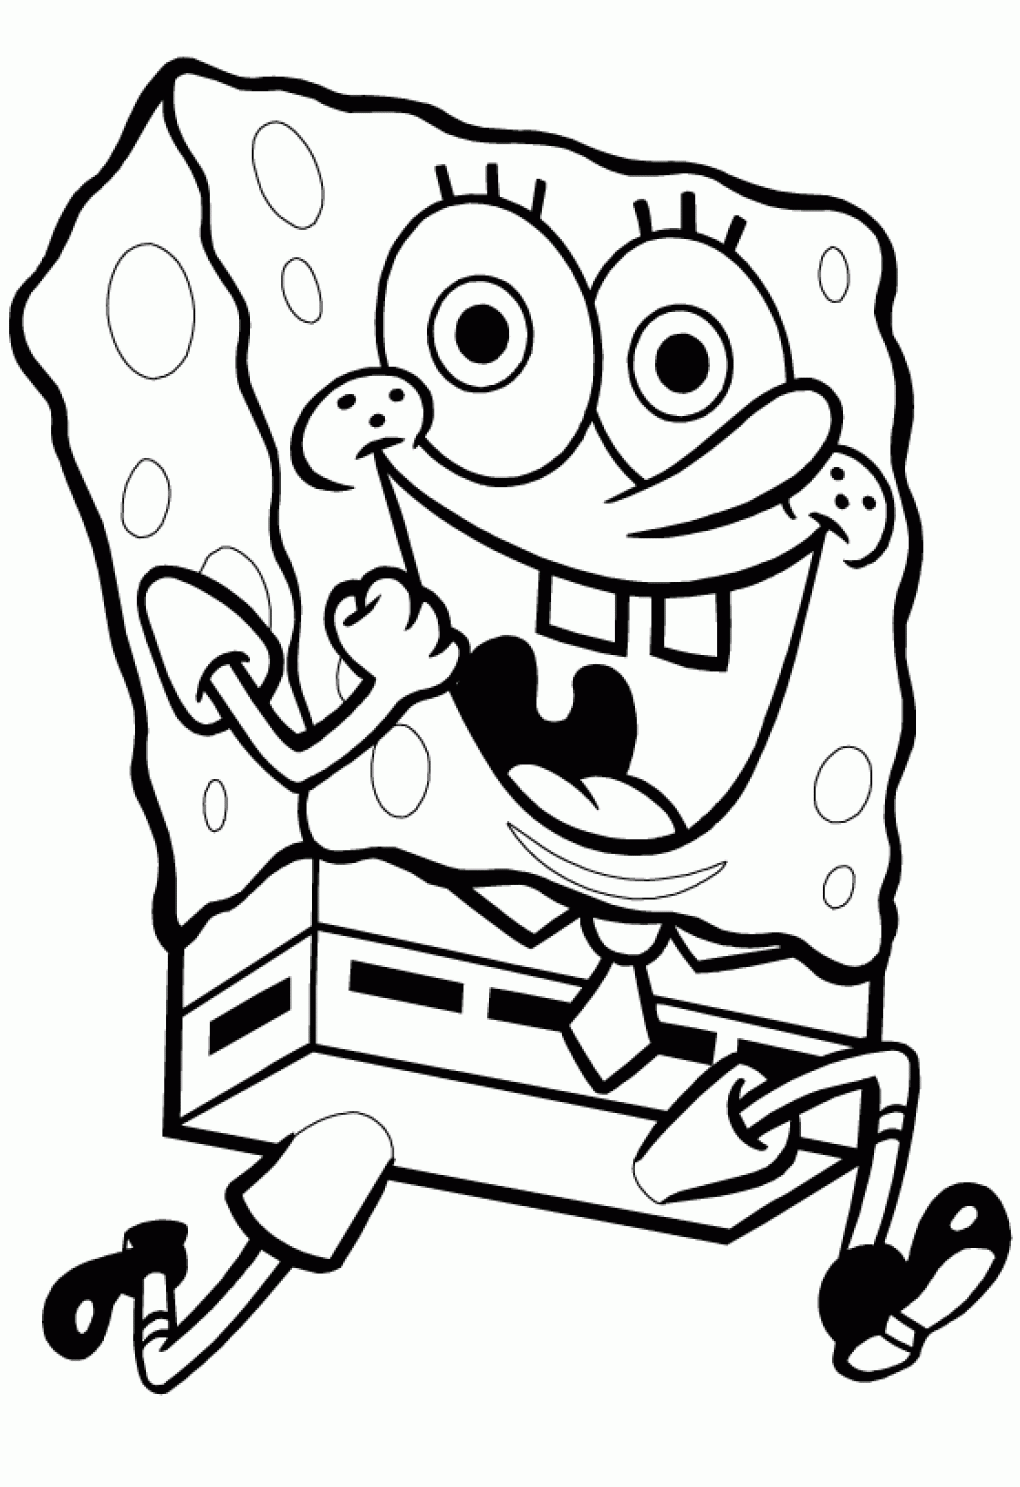 coloring pages of sopngebob - photo #23